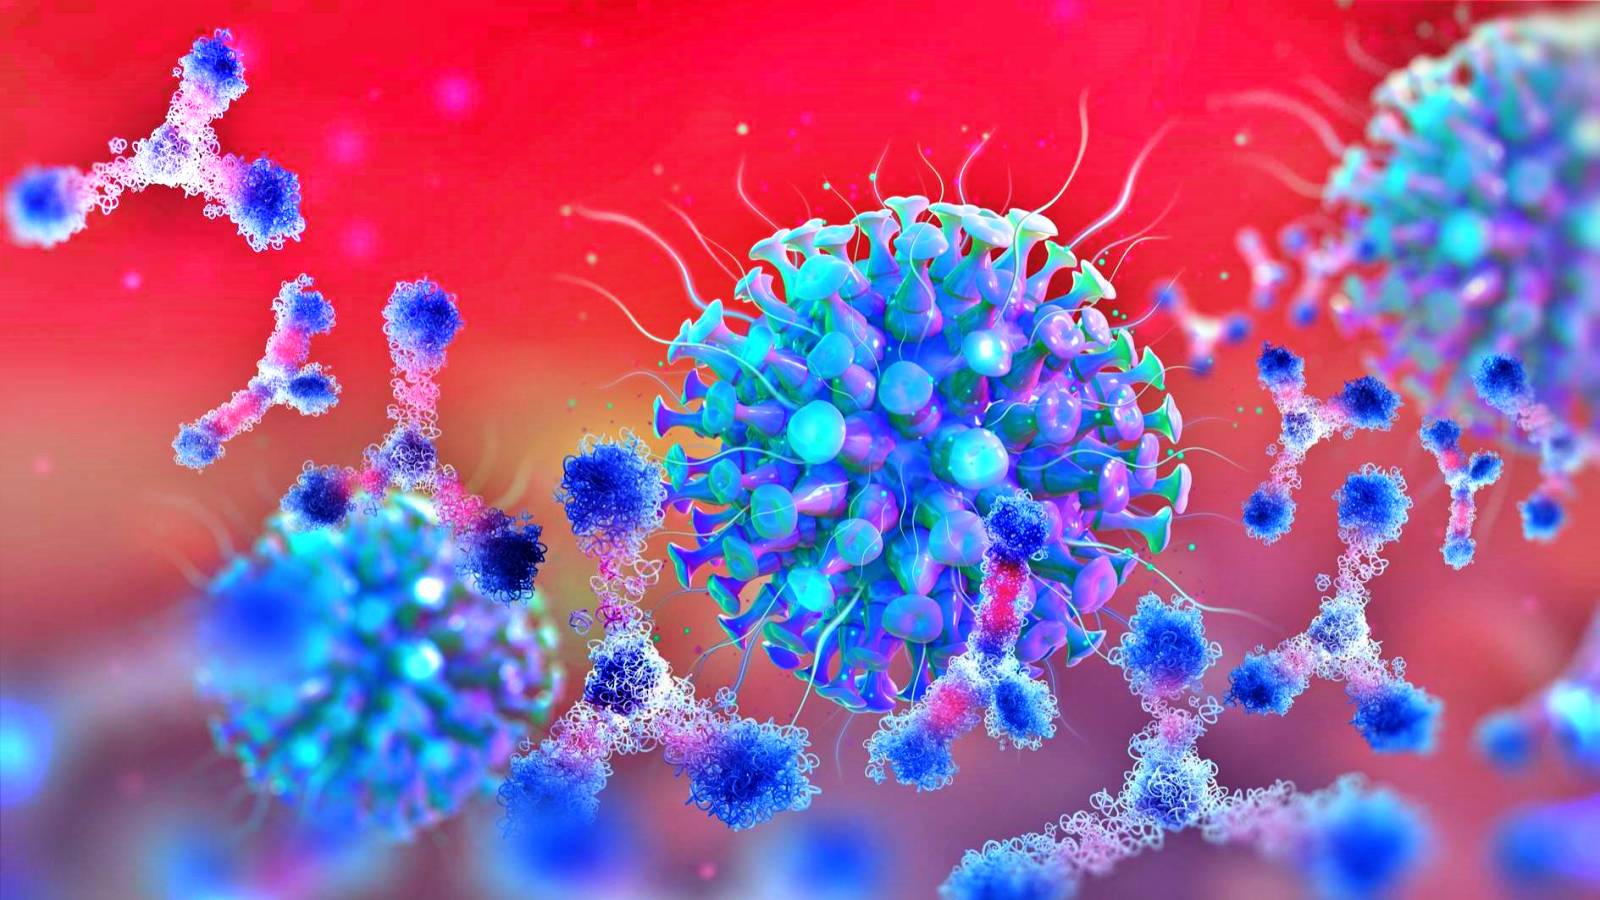 Coronavirus Romania New Official Number of Confirmed Infections May 29, 2022